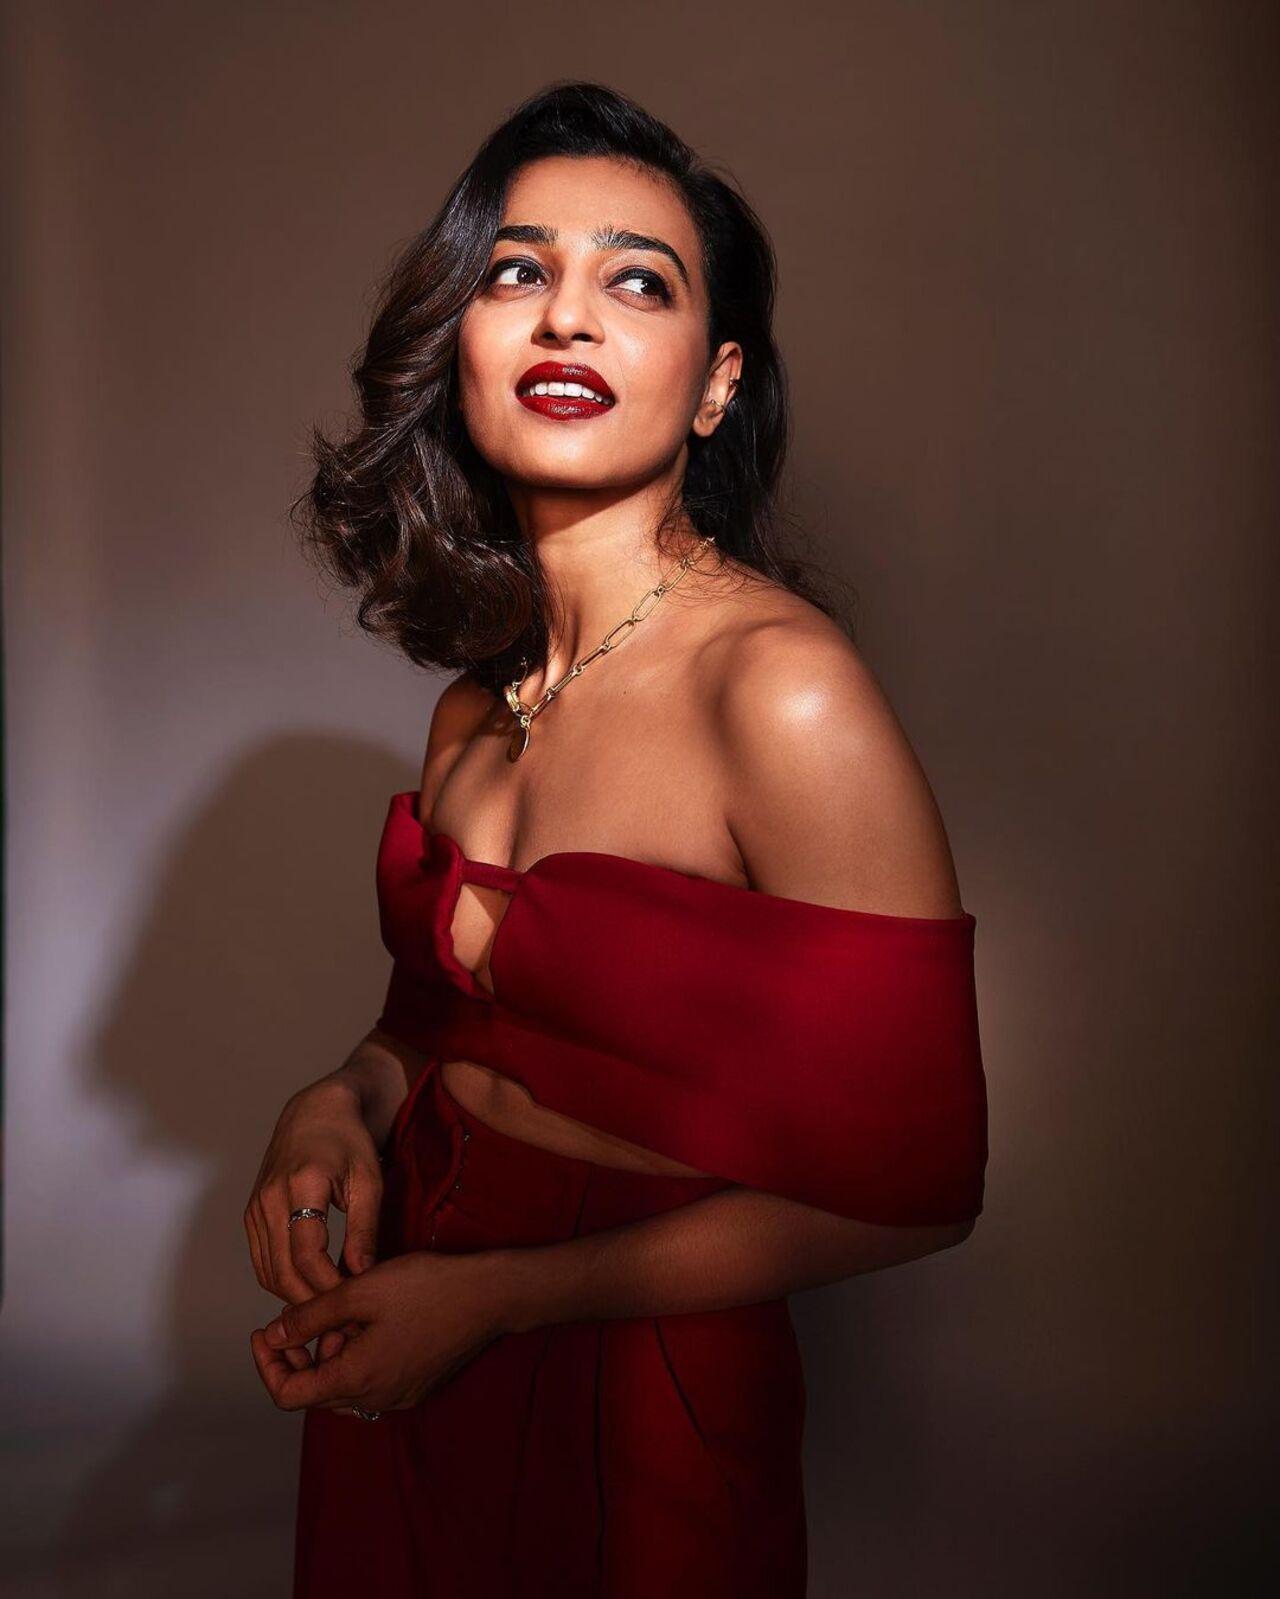 Radhika Apte, despite being an established actress found fame in series like ‘Sacred Games’, and ‘Ghoul’ on OTT. 